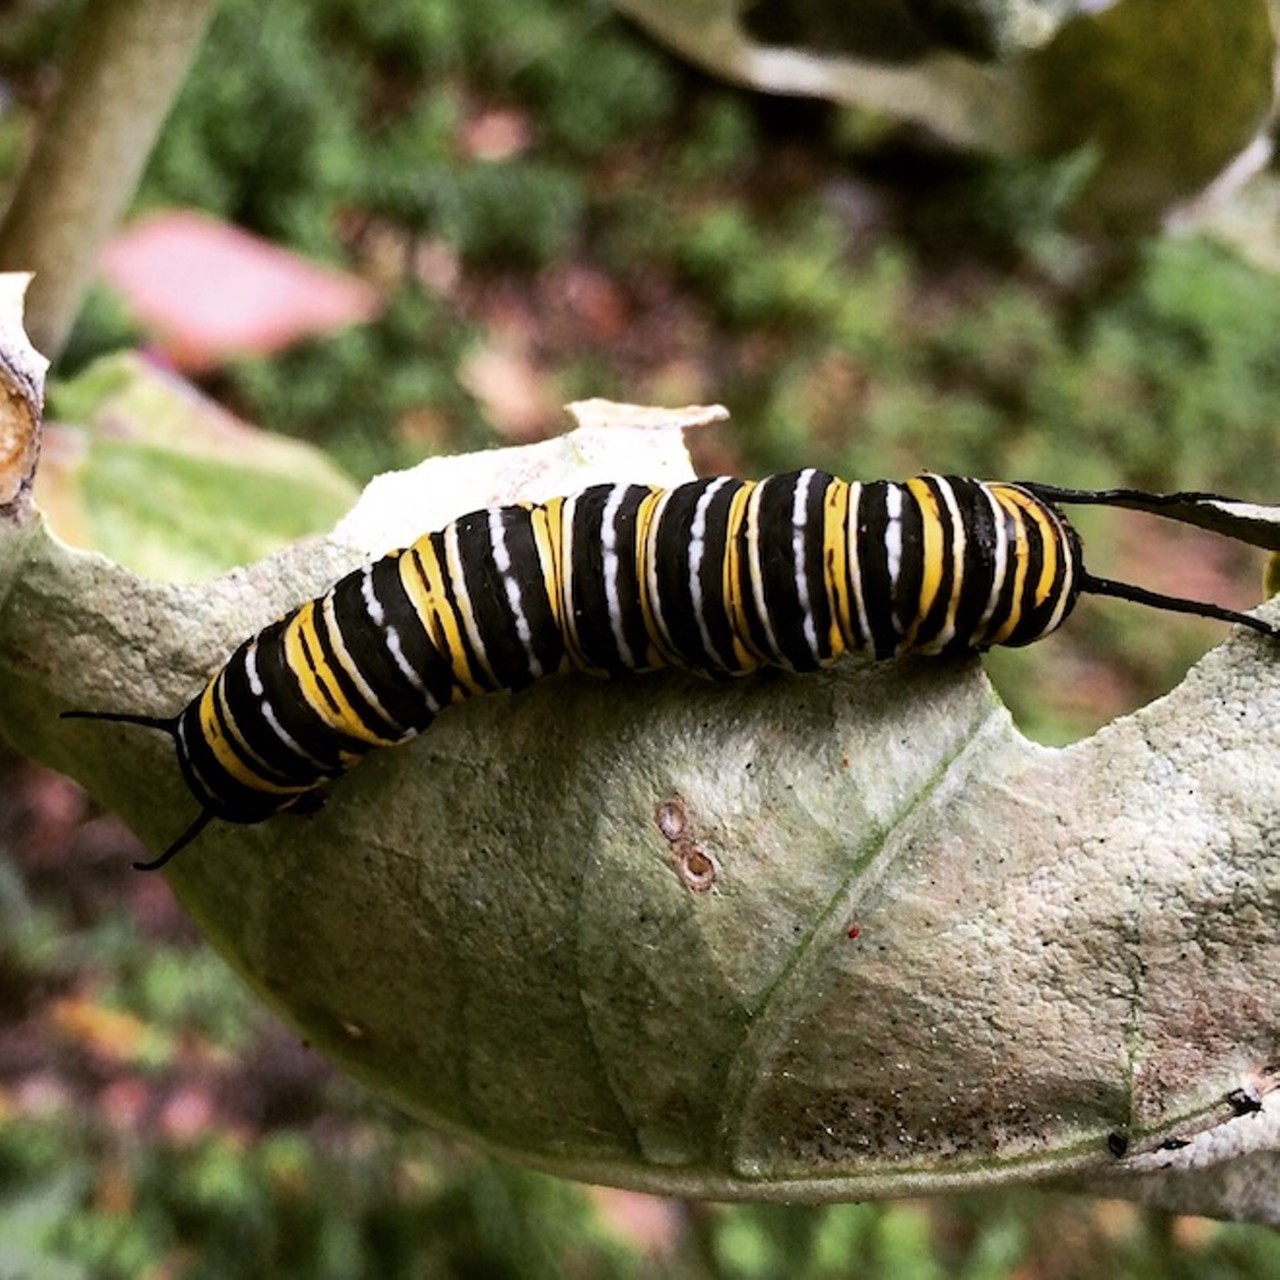 This Monarch caterpillar survived the frost last week!